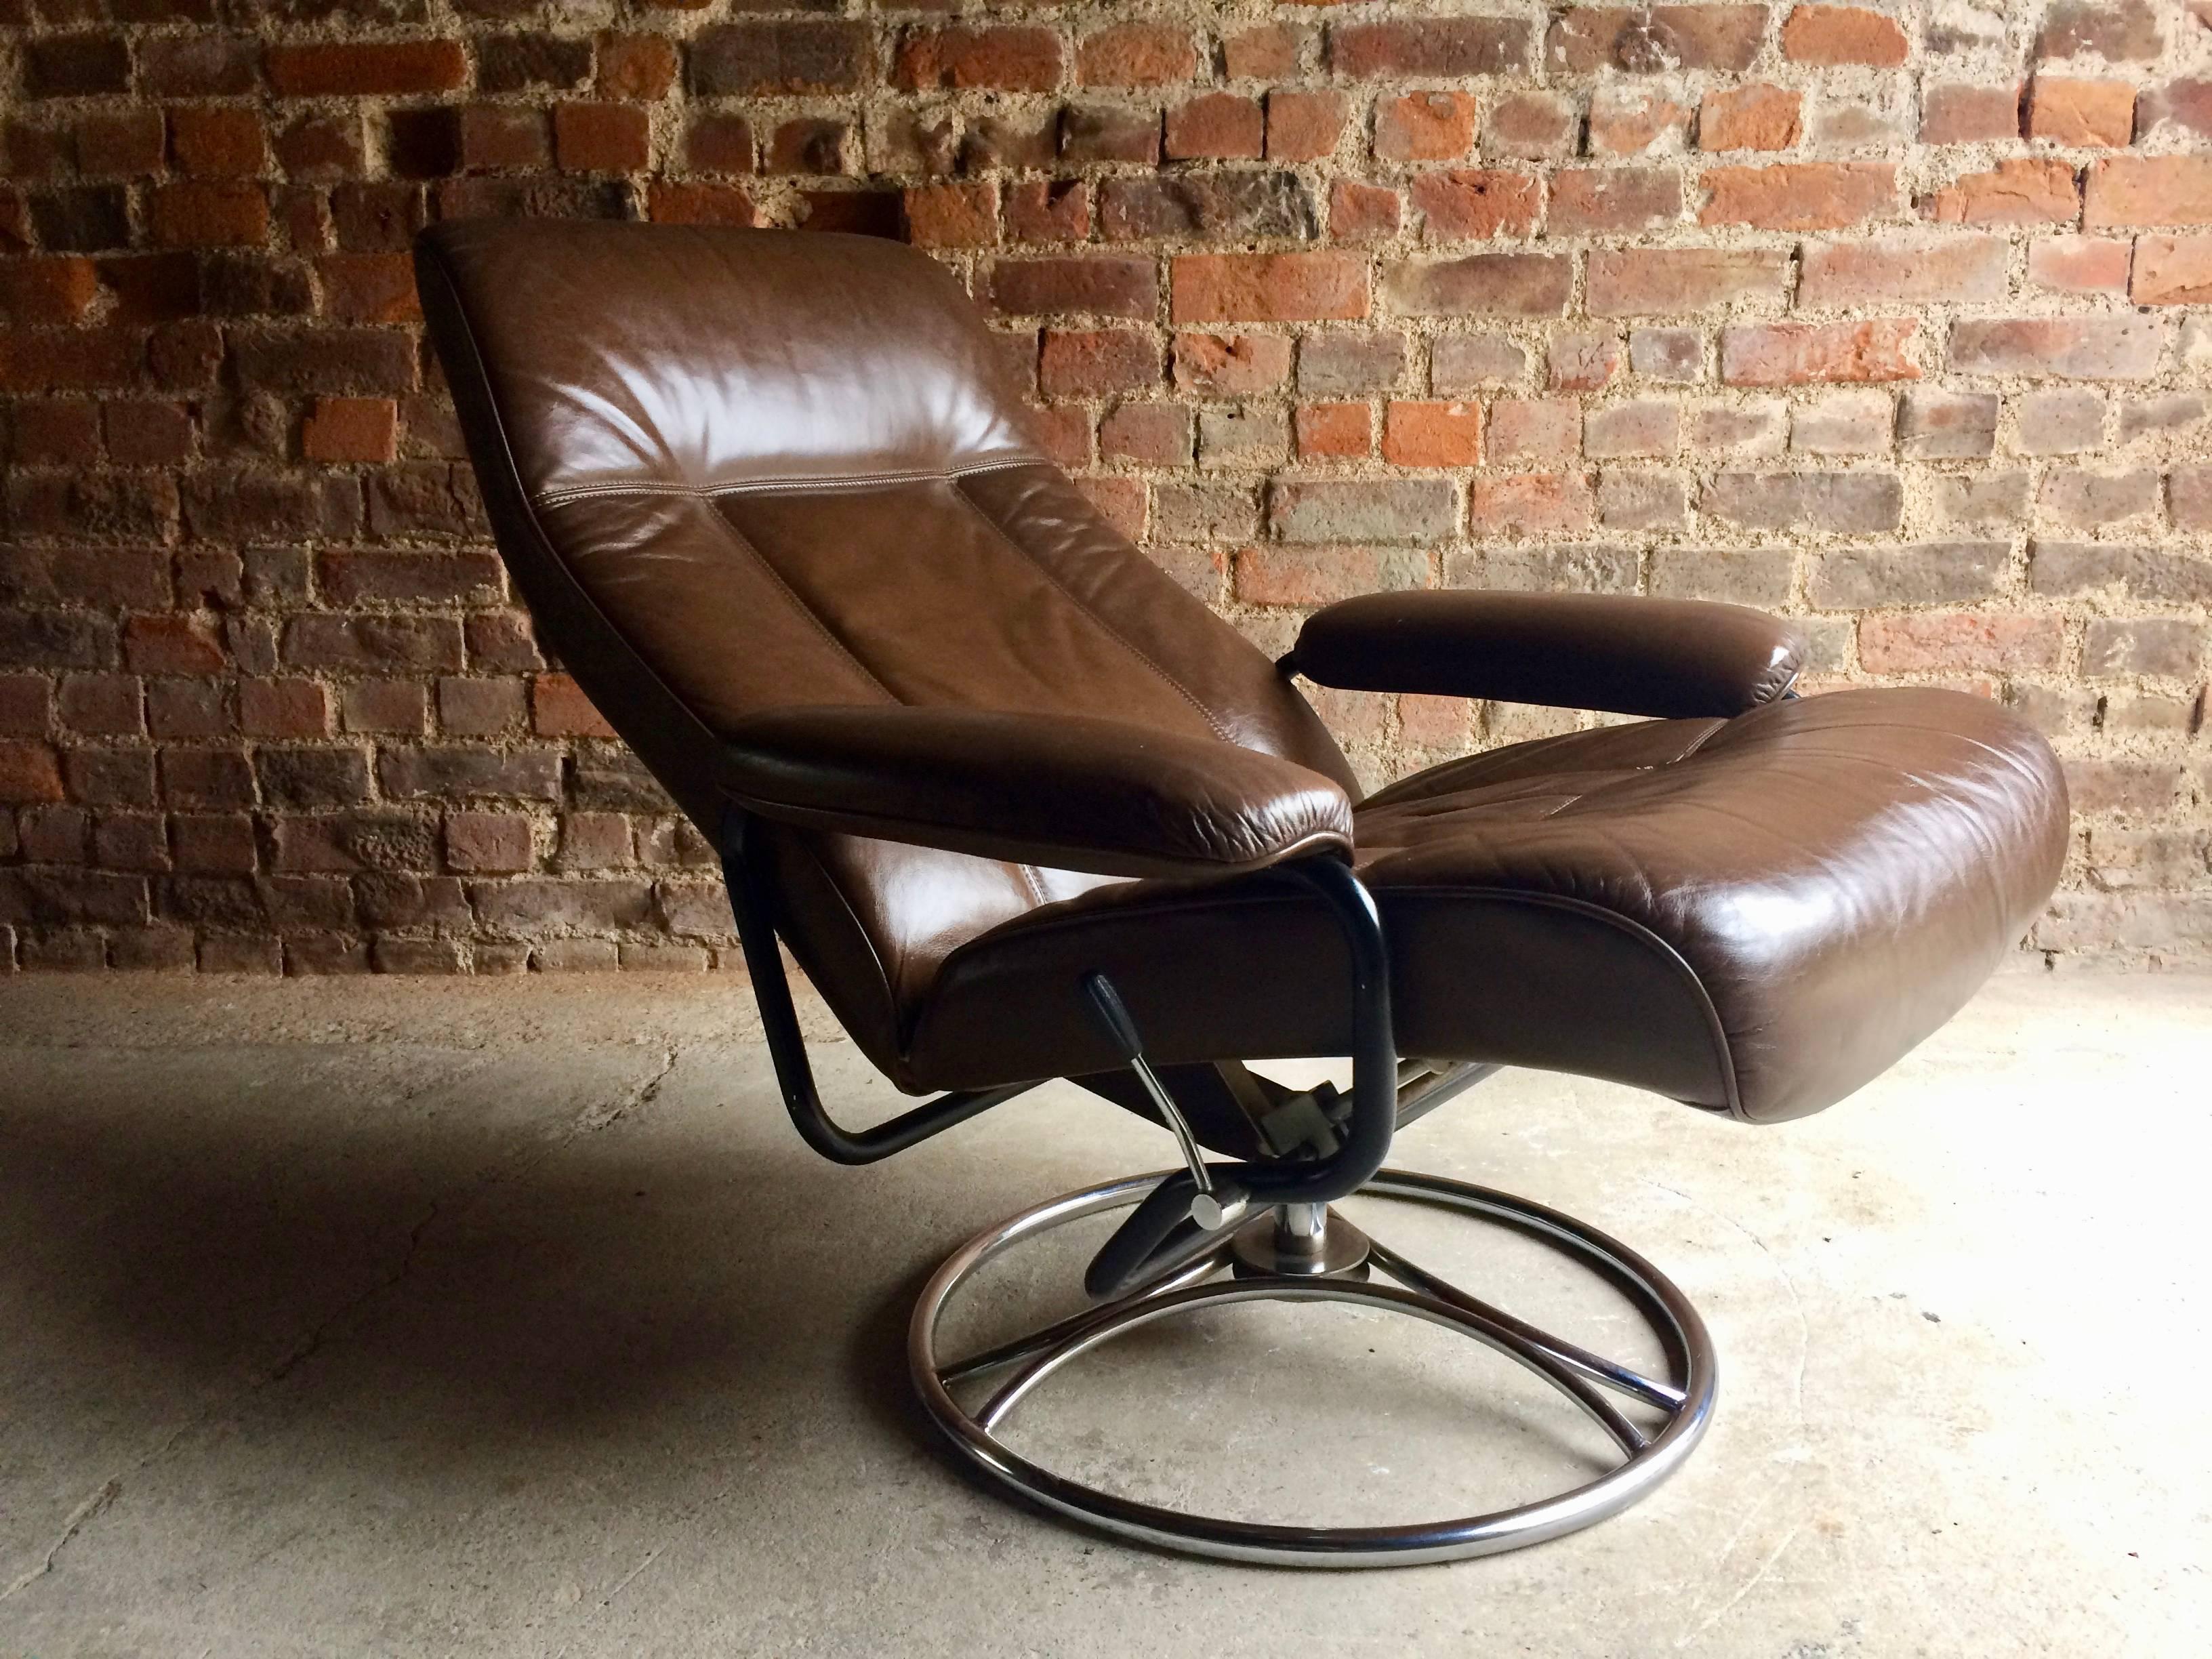 A magnificent Mid-Century, 1970s, Swedish leather reclining swivel armchair with chromed metal base by Söderbergs of Sweden (label to base) the chair upholstered in soft chocolate brown leather is offered in superb condition with the softest leather